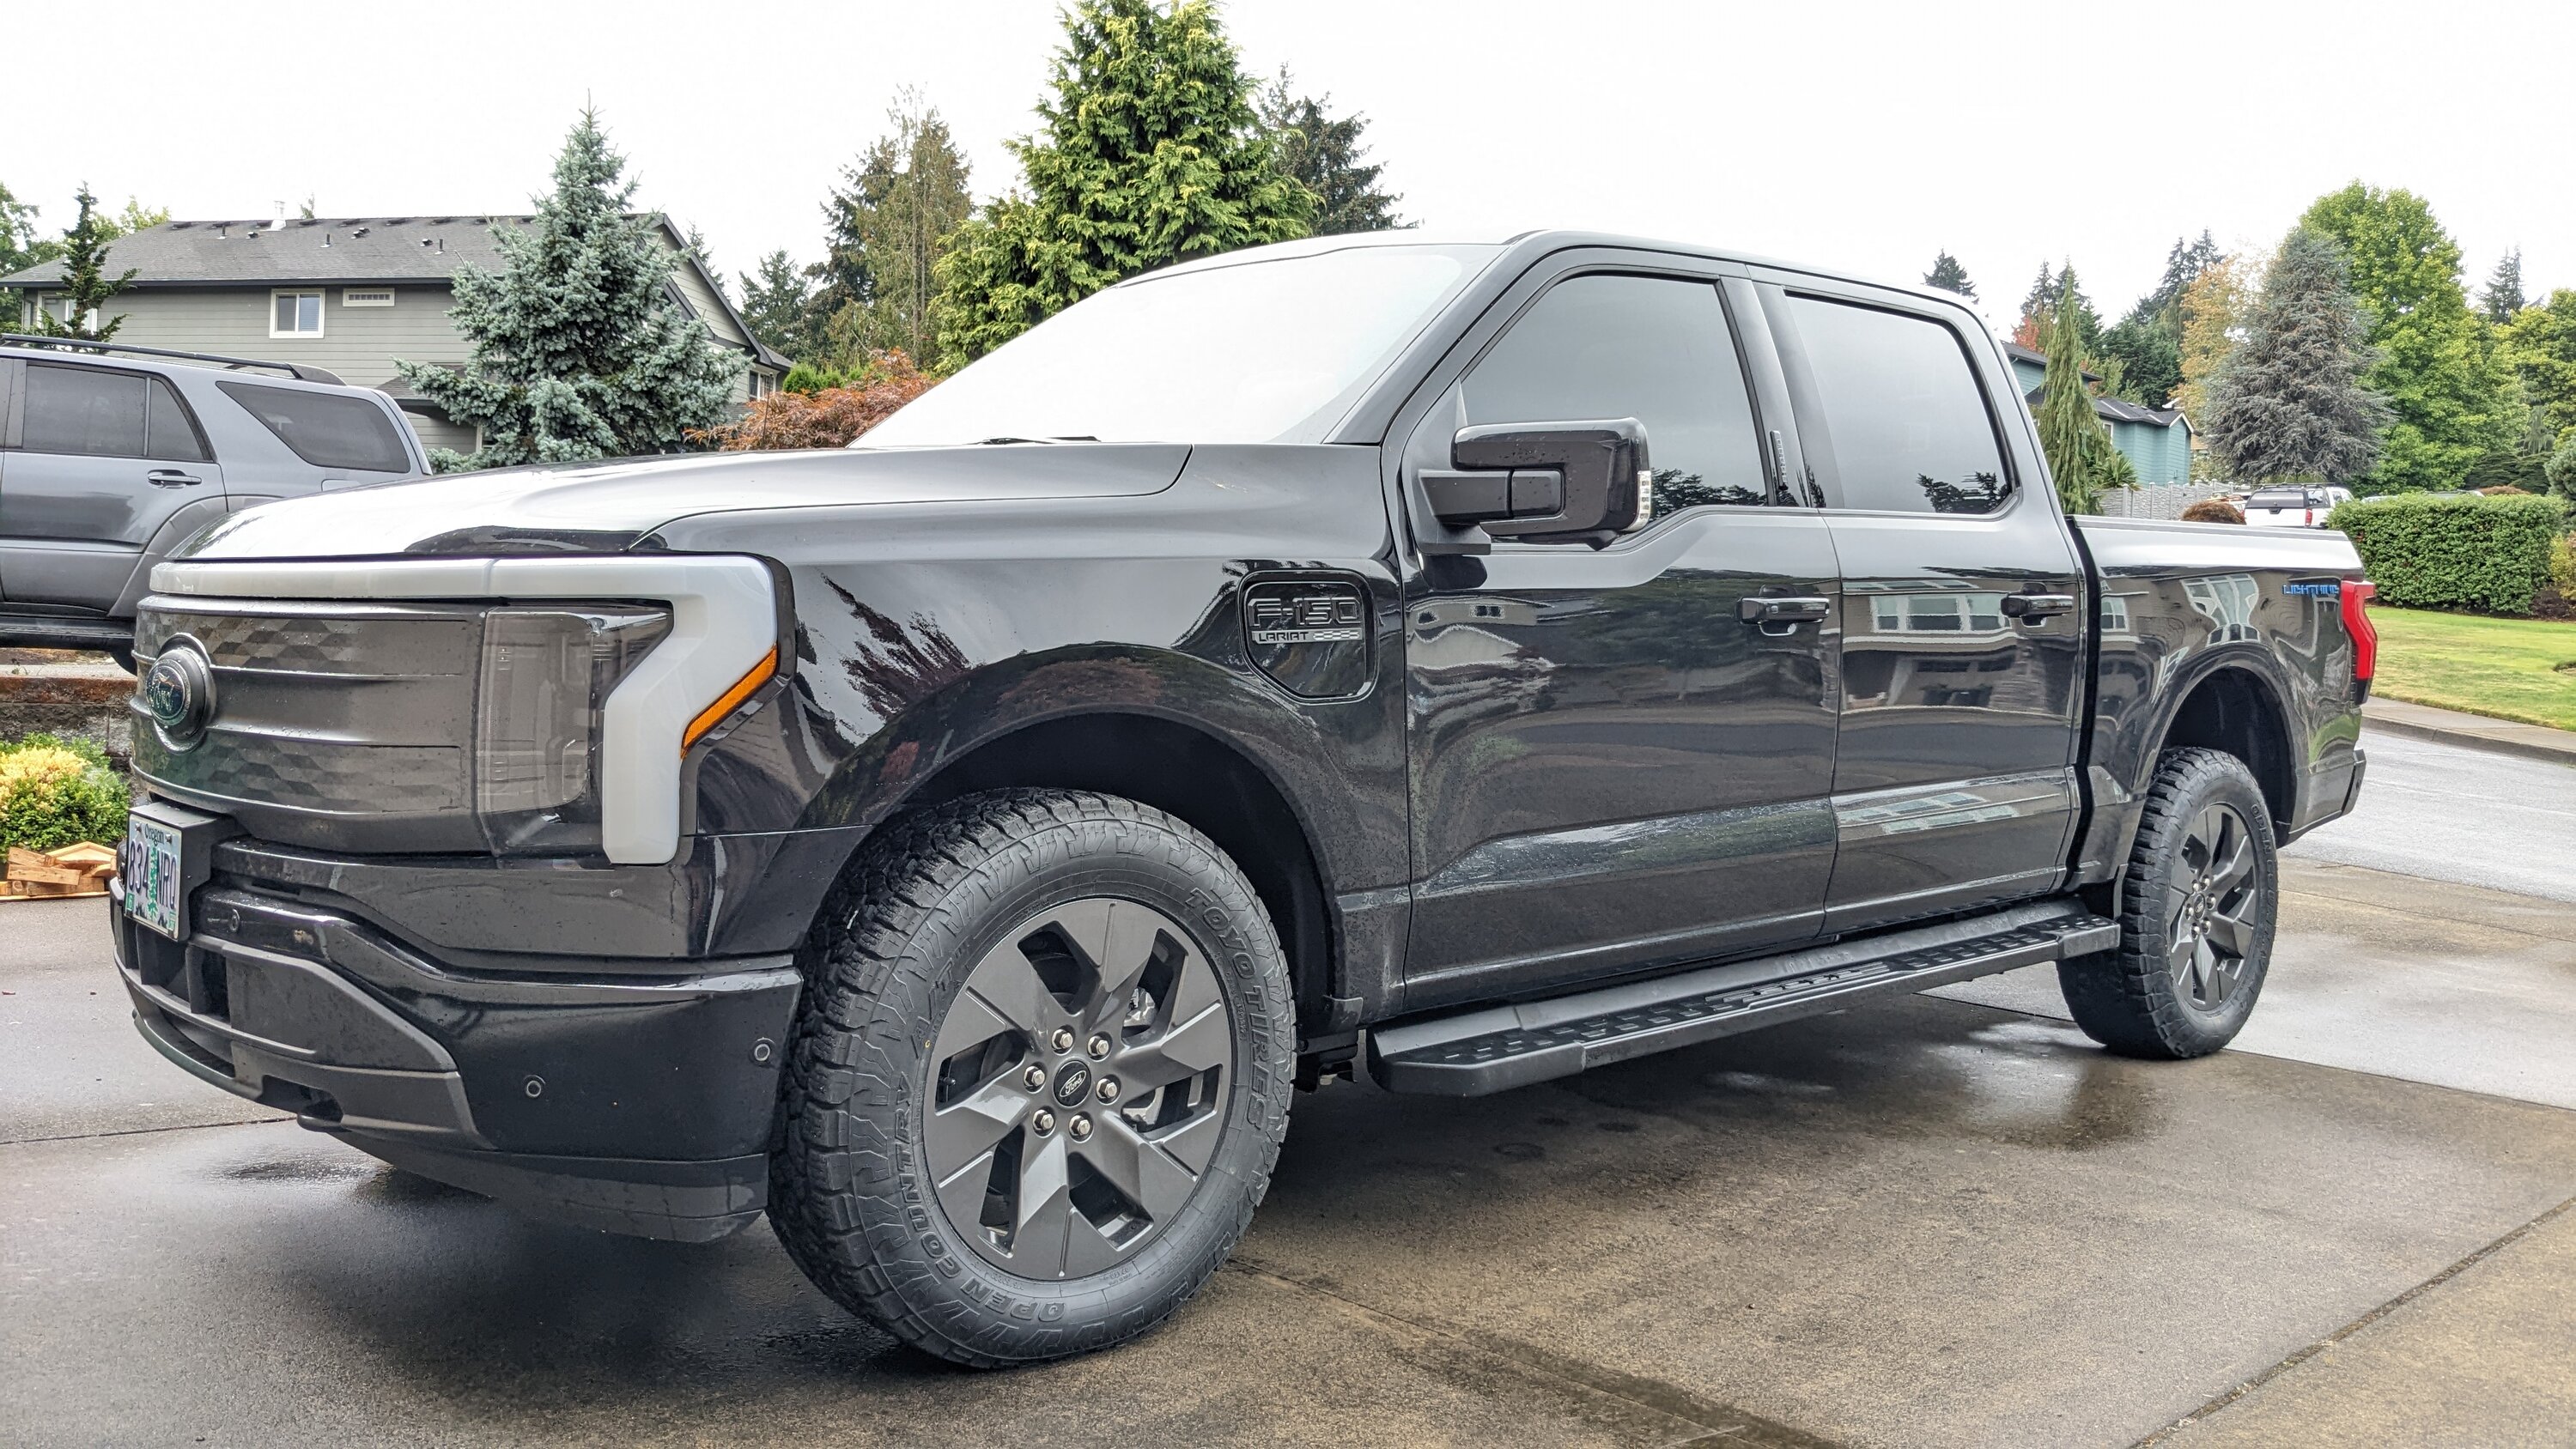 Ford F-150 Lightning Toyo Open Country ATIII tires installed, w/pics PXL_20220928_190554298